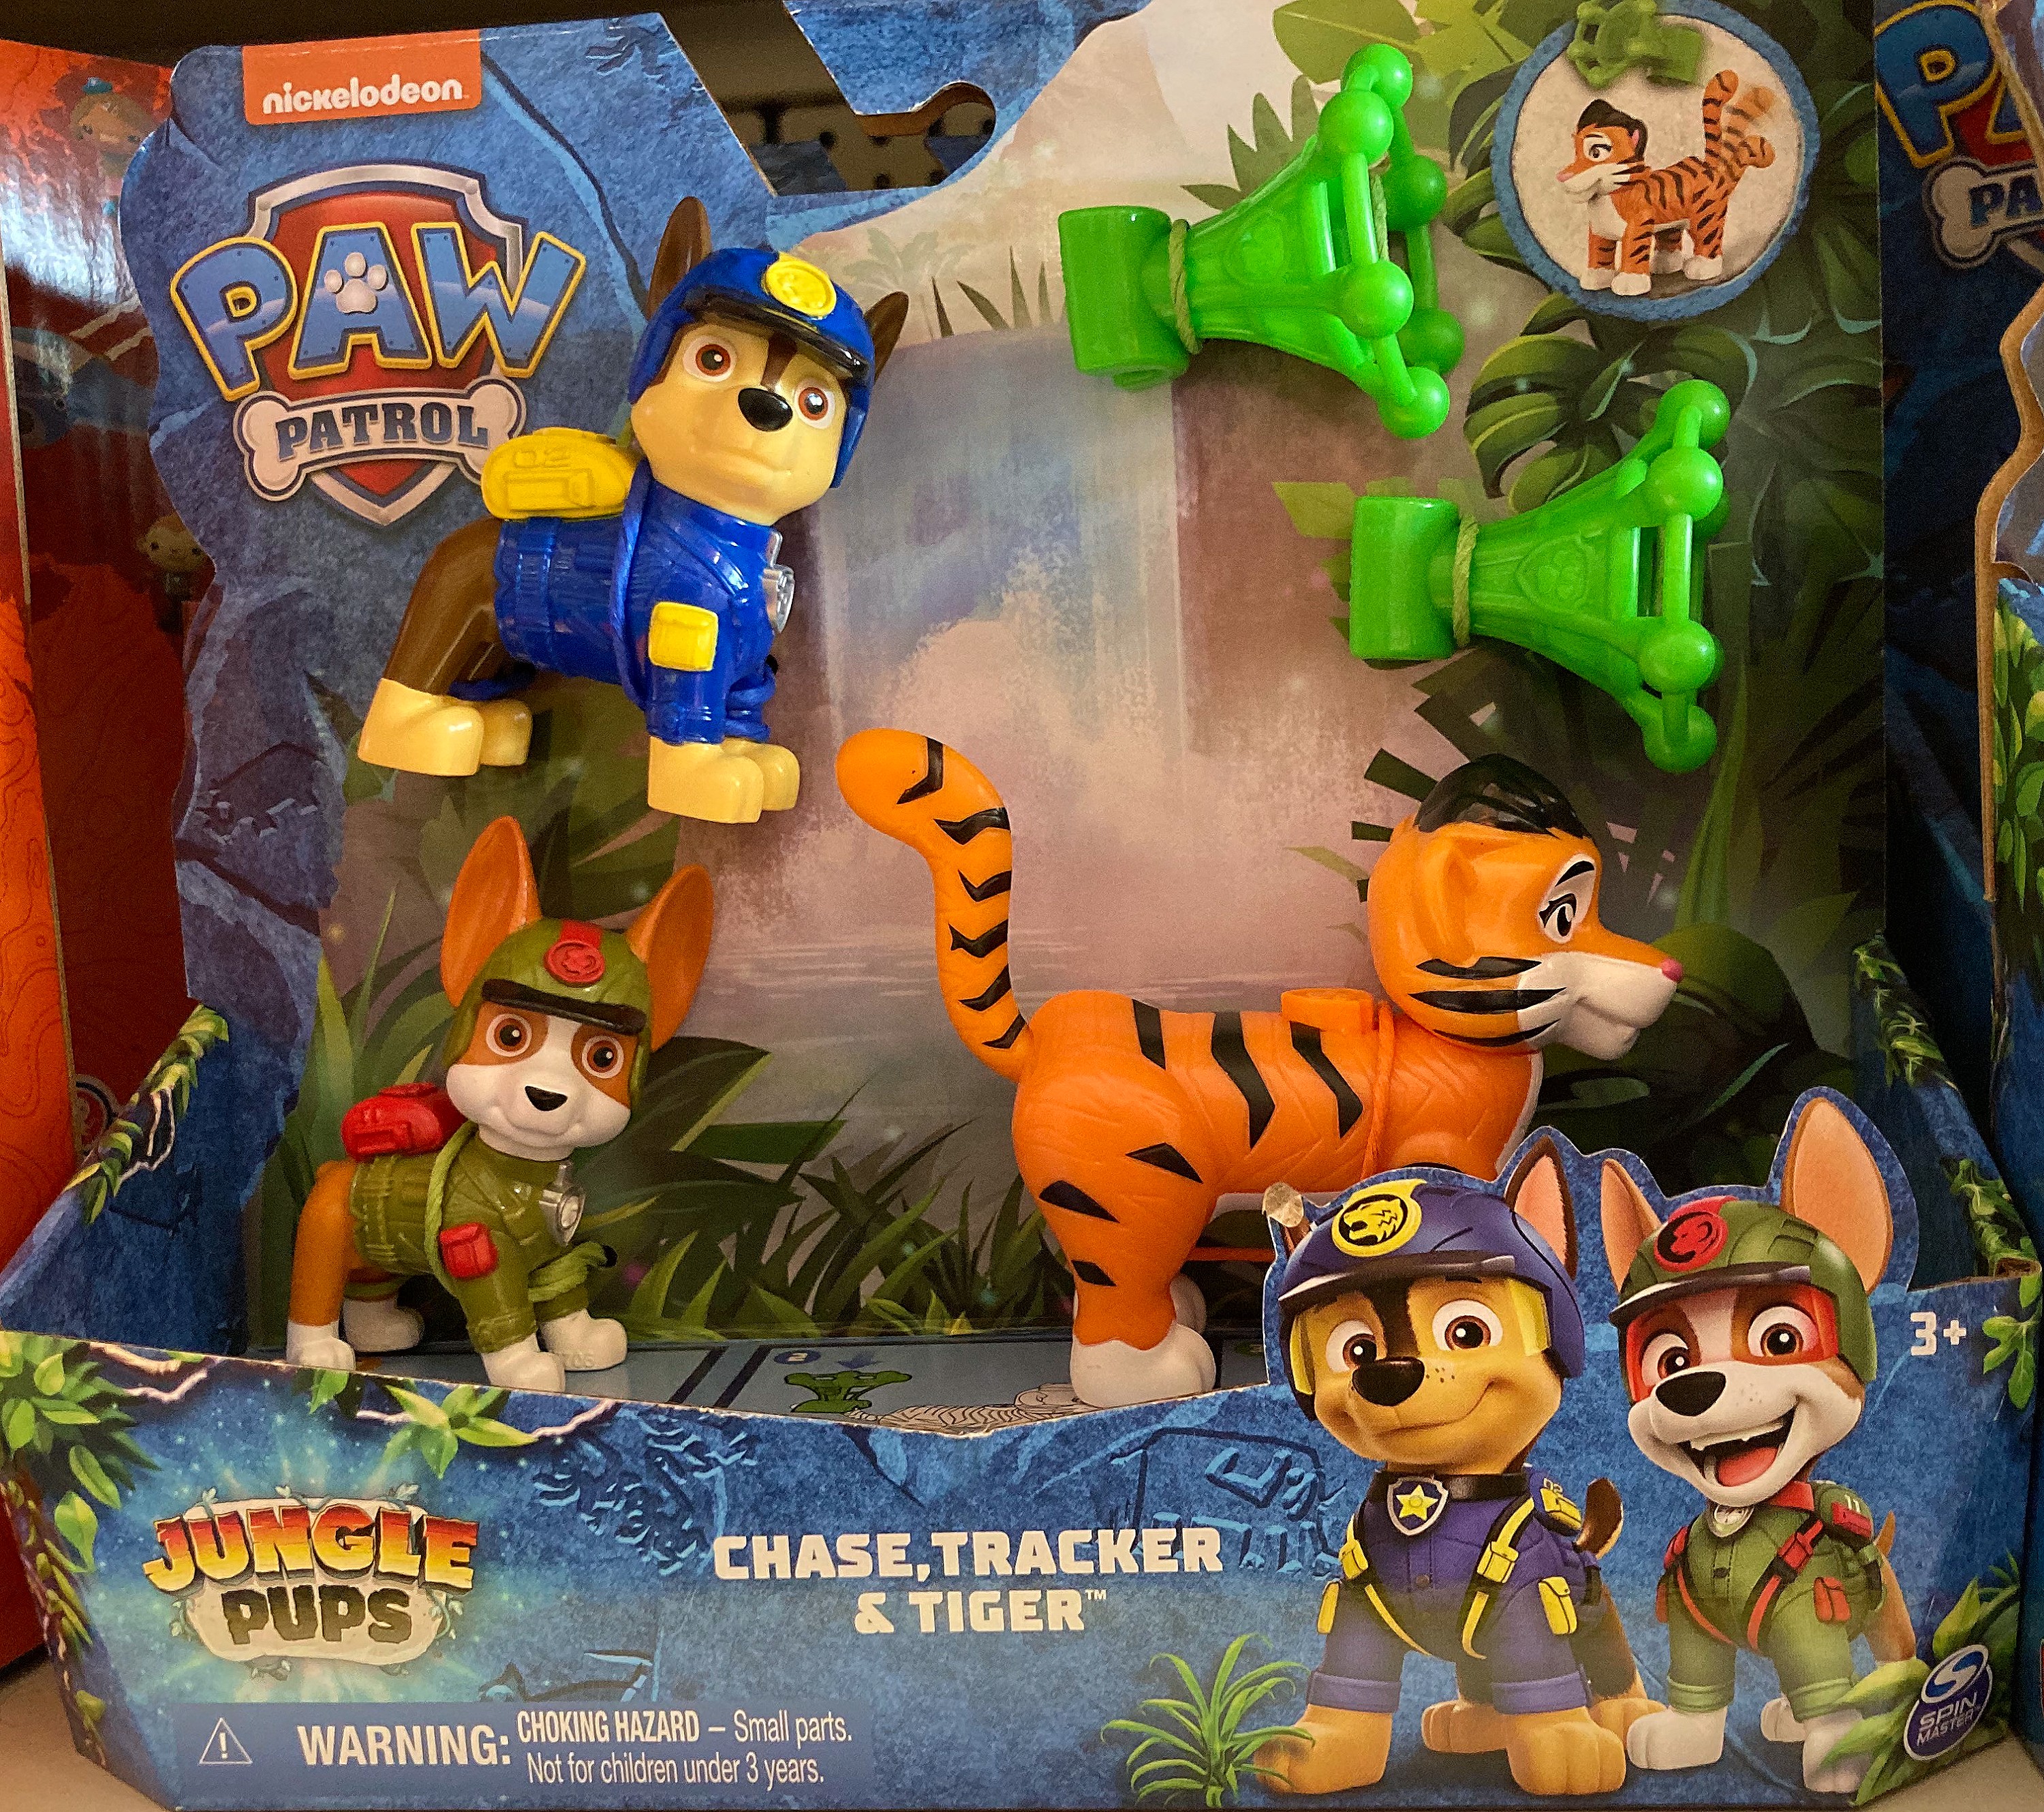 Paw Patrol Jungle Pups Toys - Chase, Tracker and Tiger